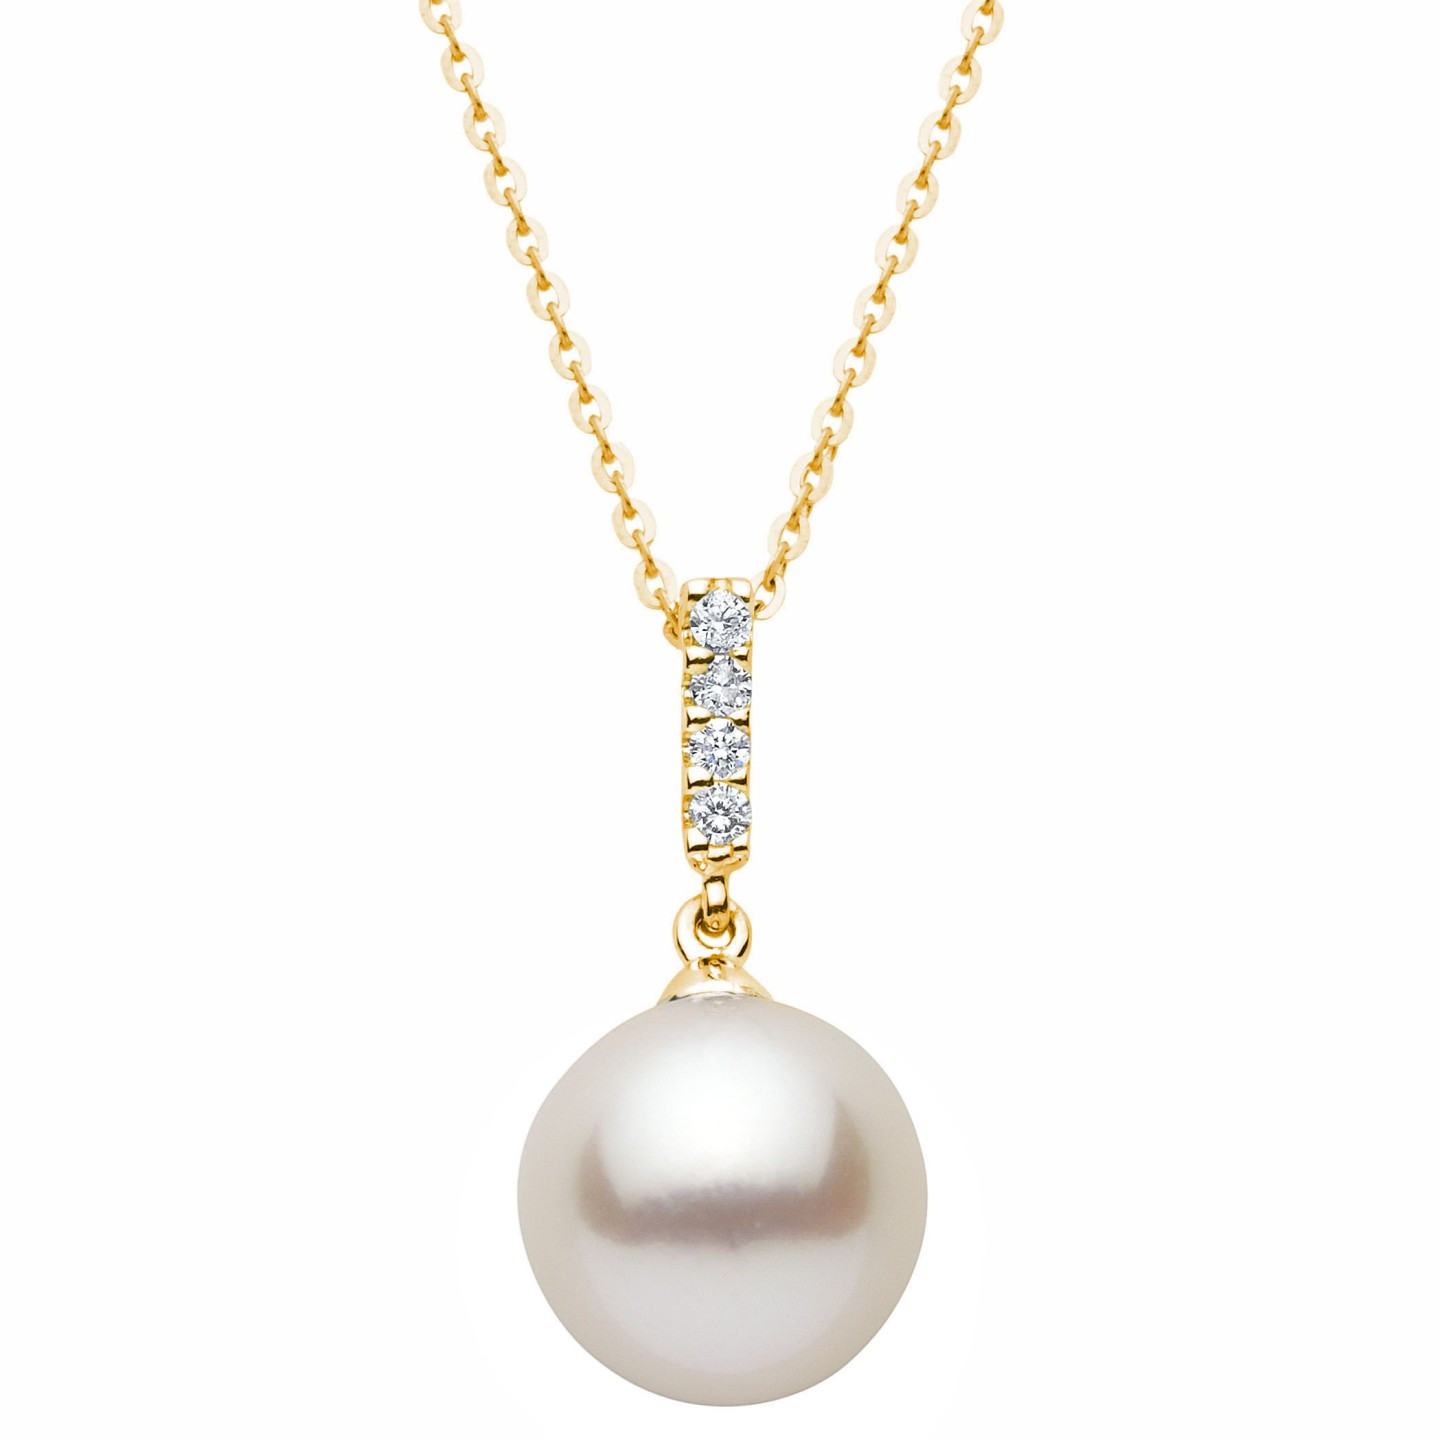 Round White Pearl Solitaire with Accents Pendant Necklace in 14K Yellow Gold With Chain (MV3170)